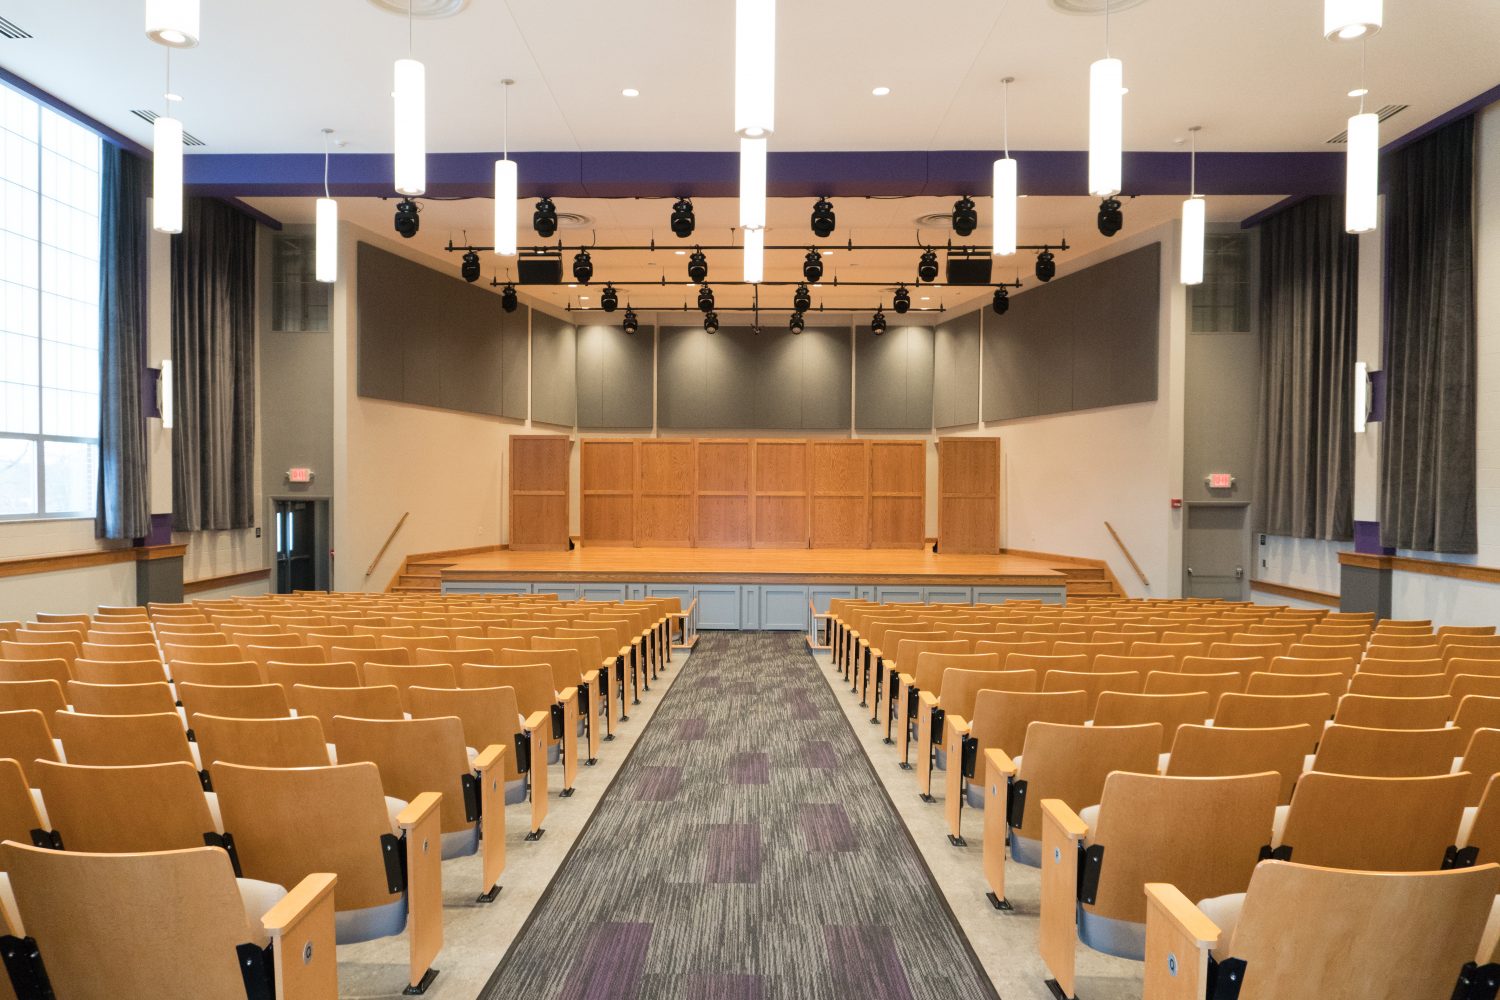 recital hall with seats, stage, and lighting